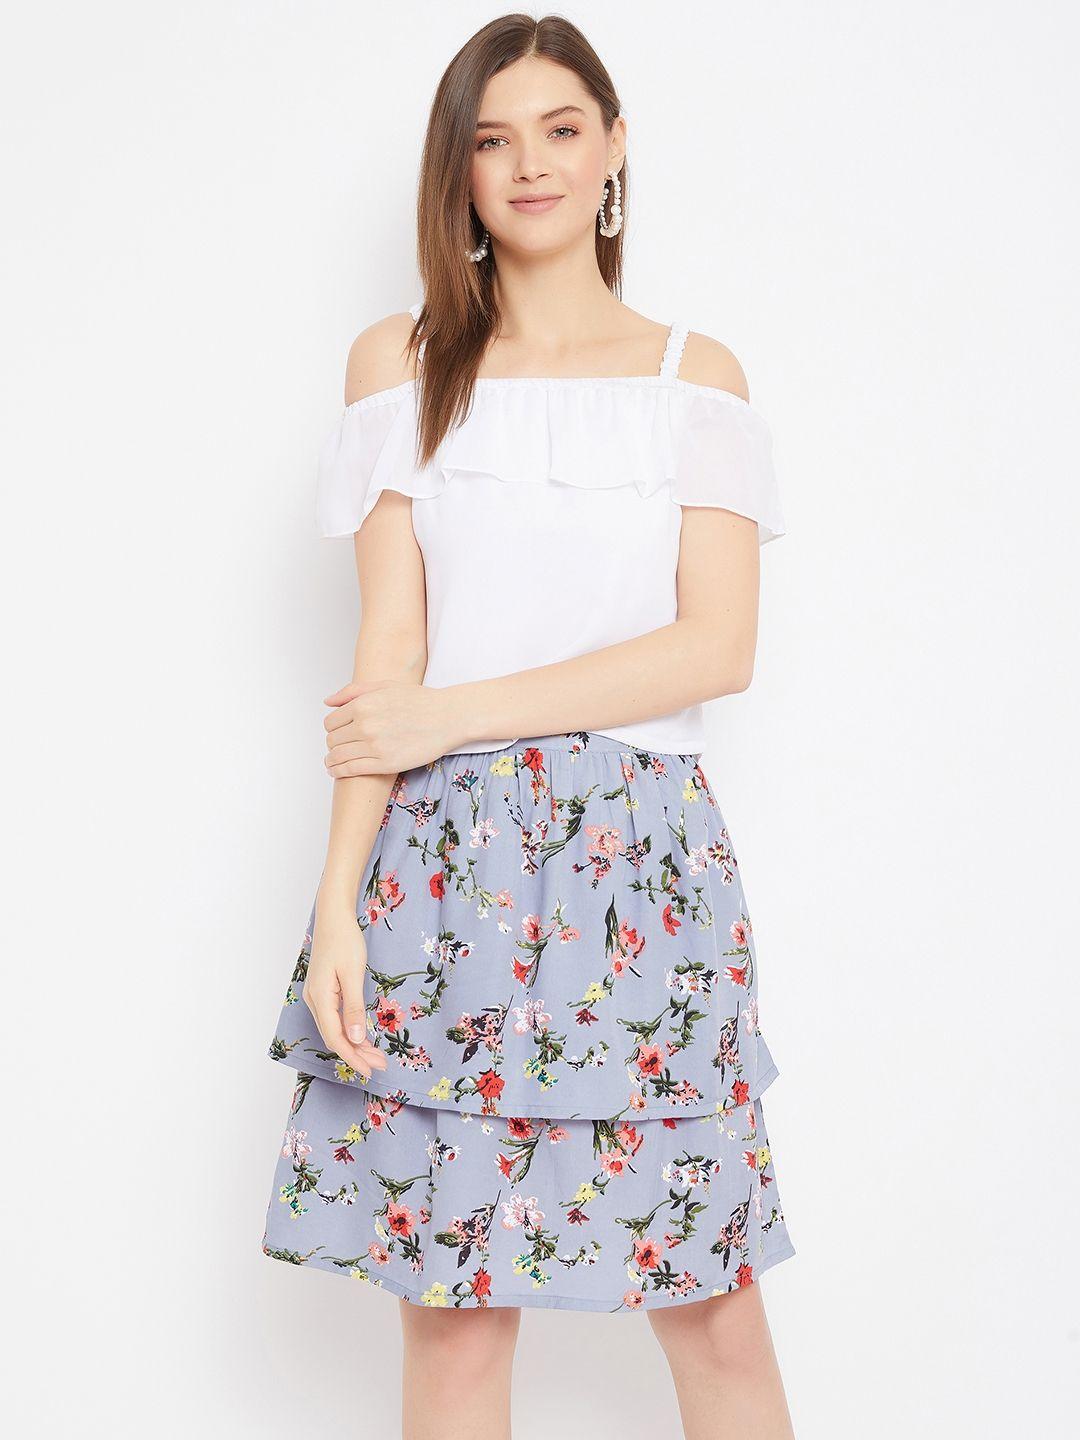 bitterlime women white off shoulder top with printed layered skirt